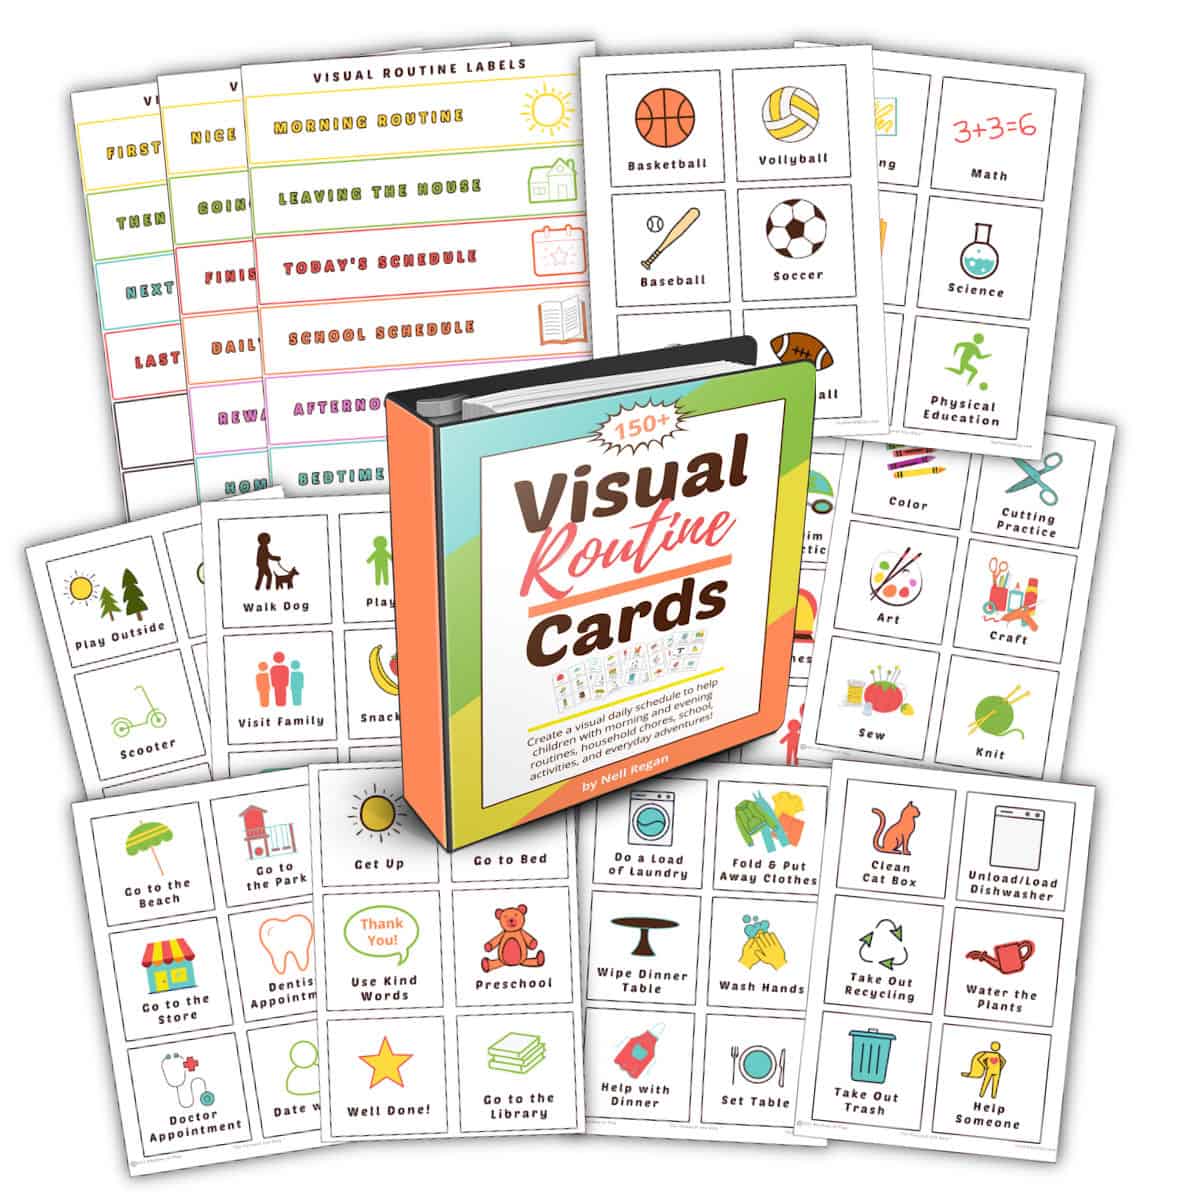 Picture of visual routine cards included in set to help children learn to self-regulate